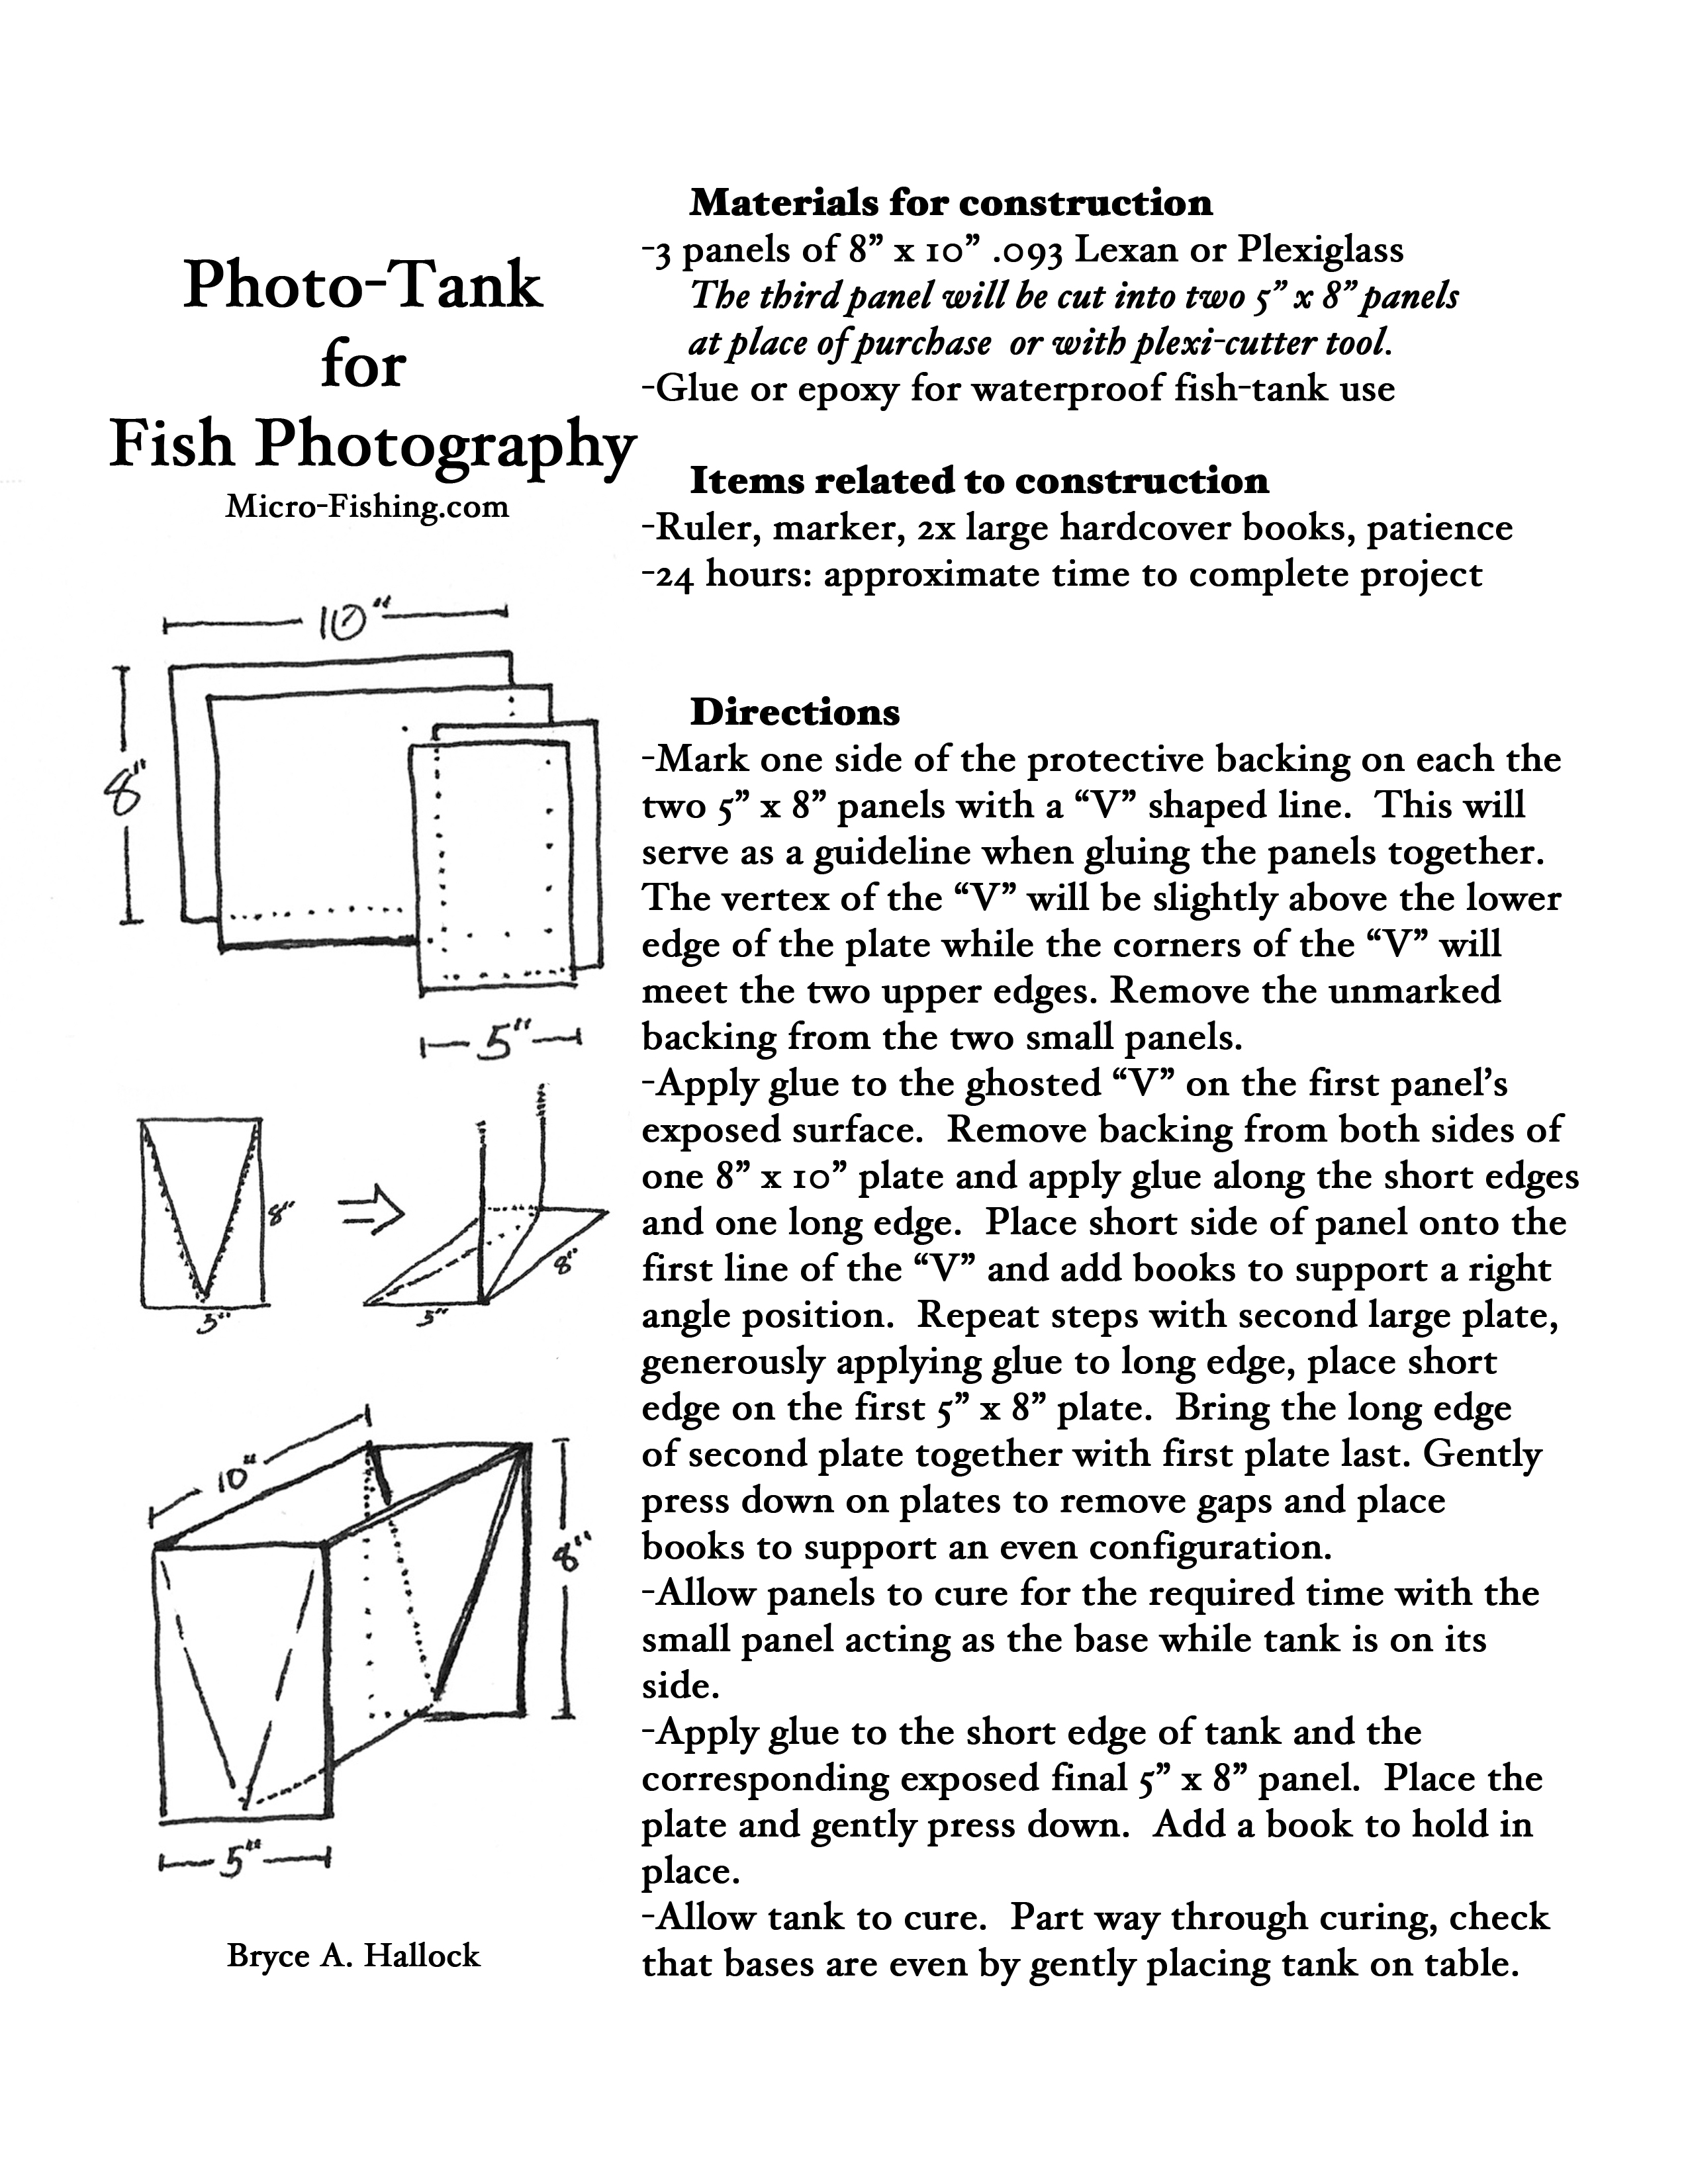 Plans for photo-tank used while micro-fishing